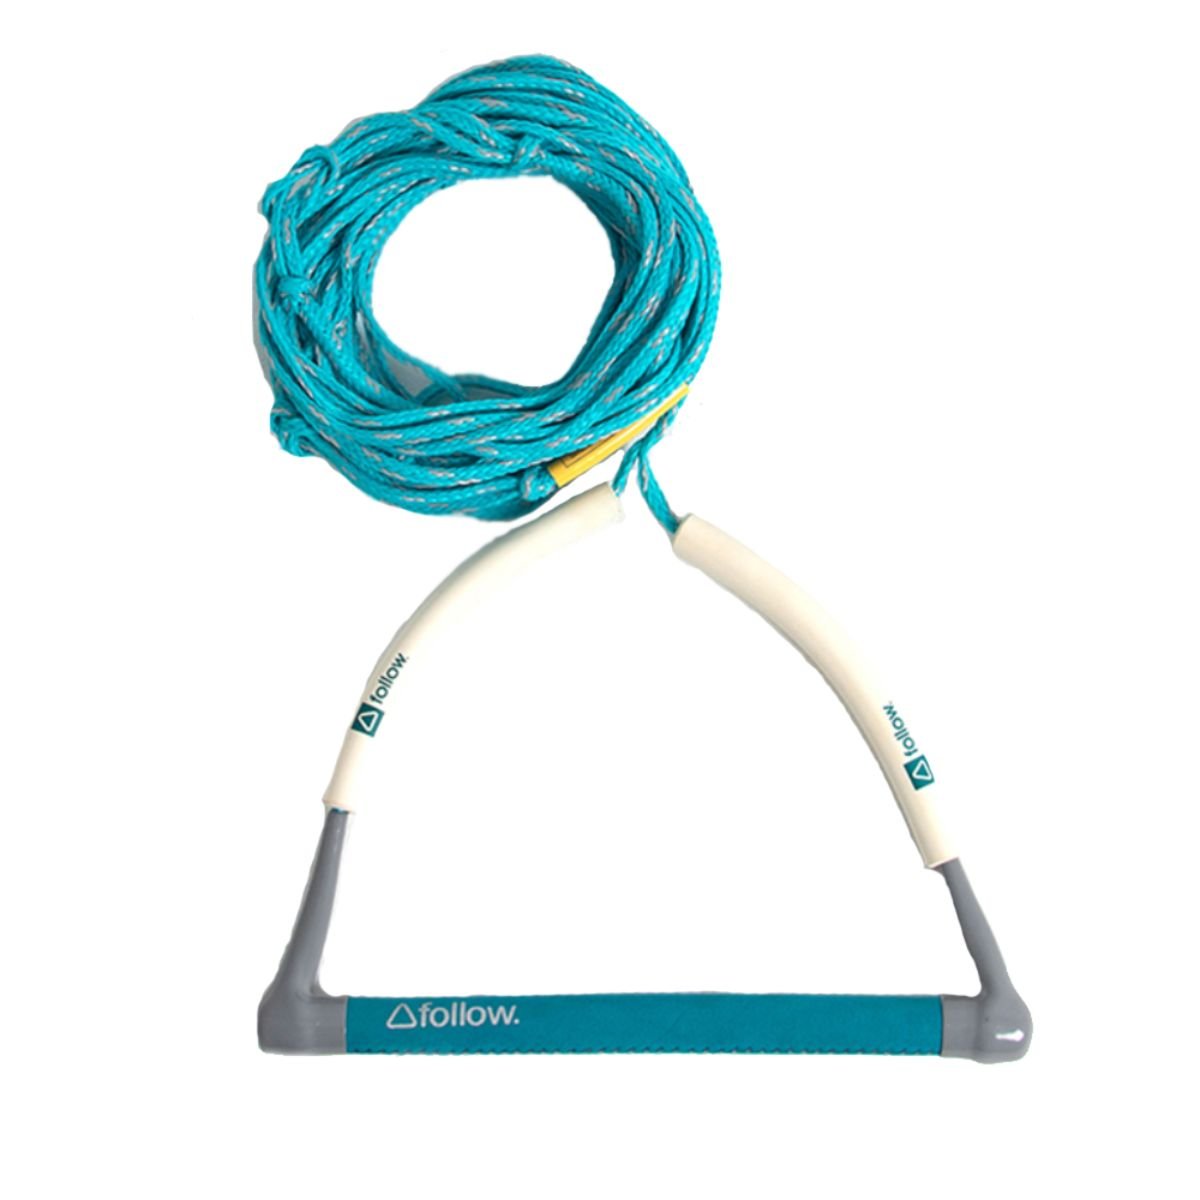 Follow The Basic Package Rope in Teal/Grey - BoardCo